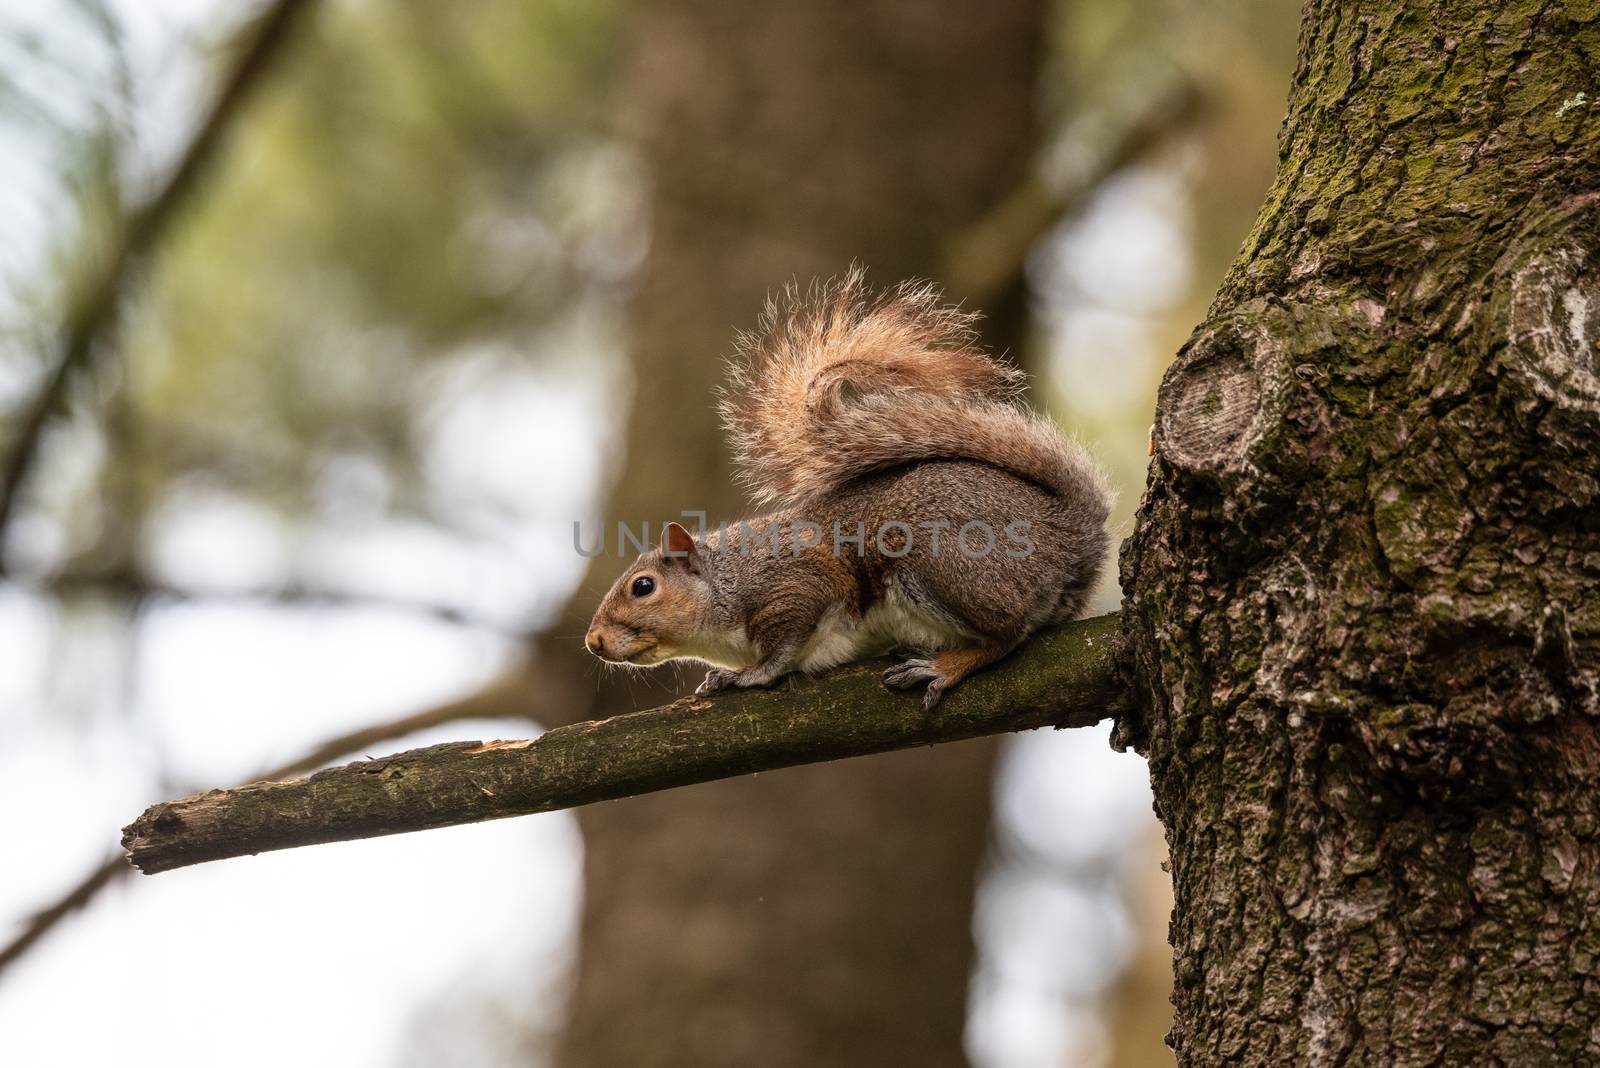 Gray squirrel on a tree branch by brambillasimone